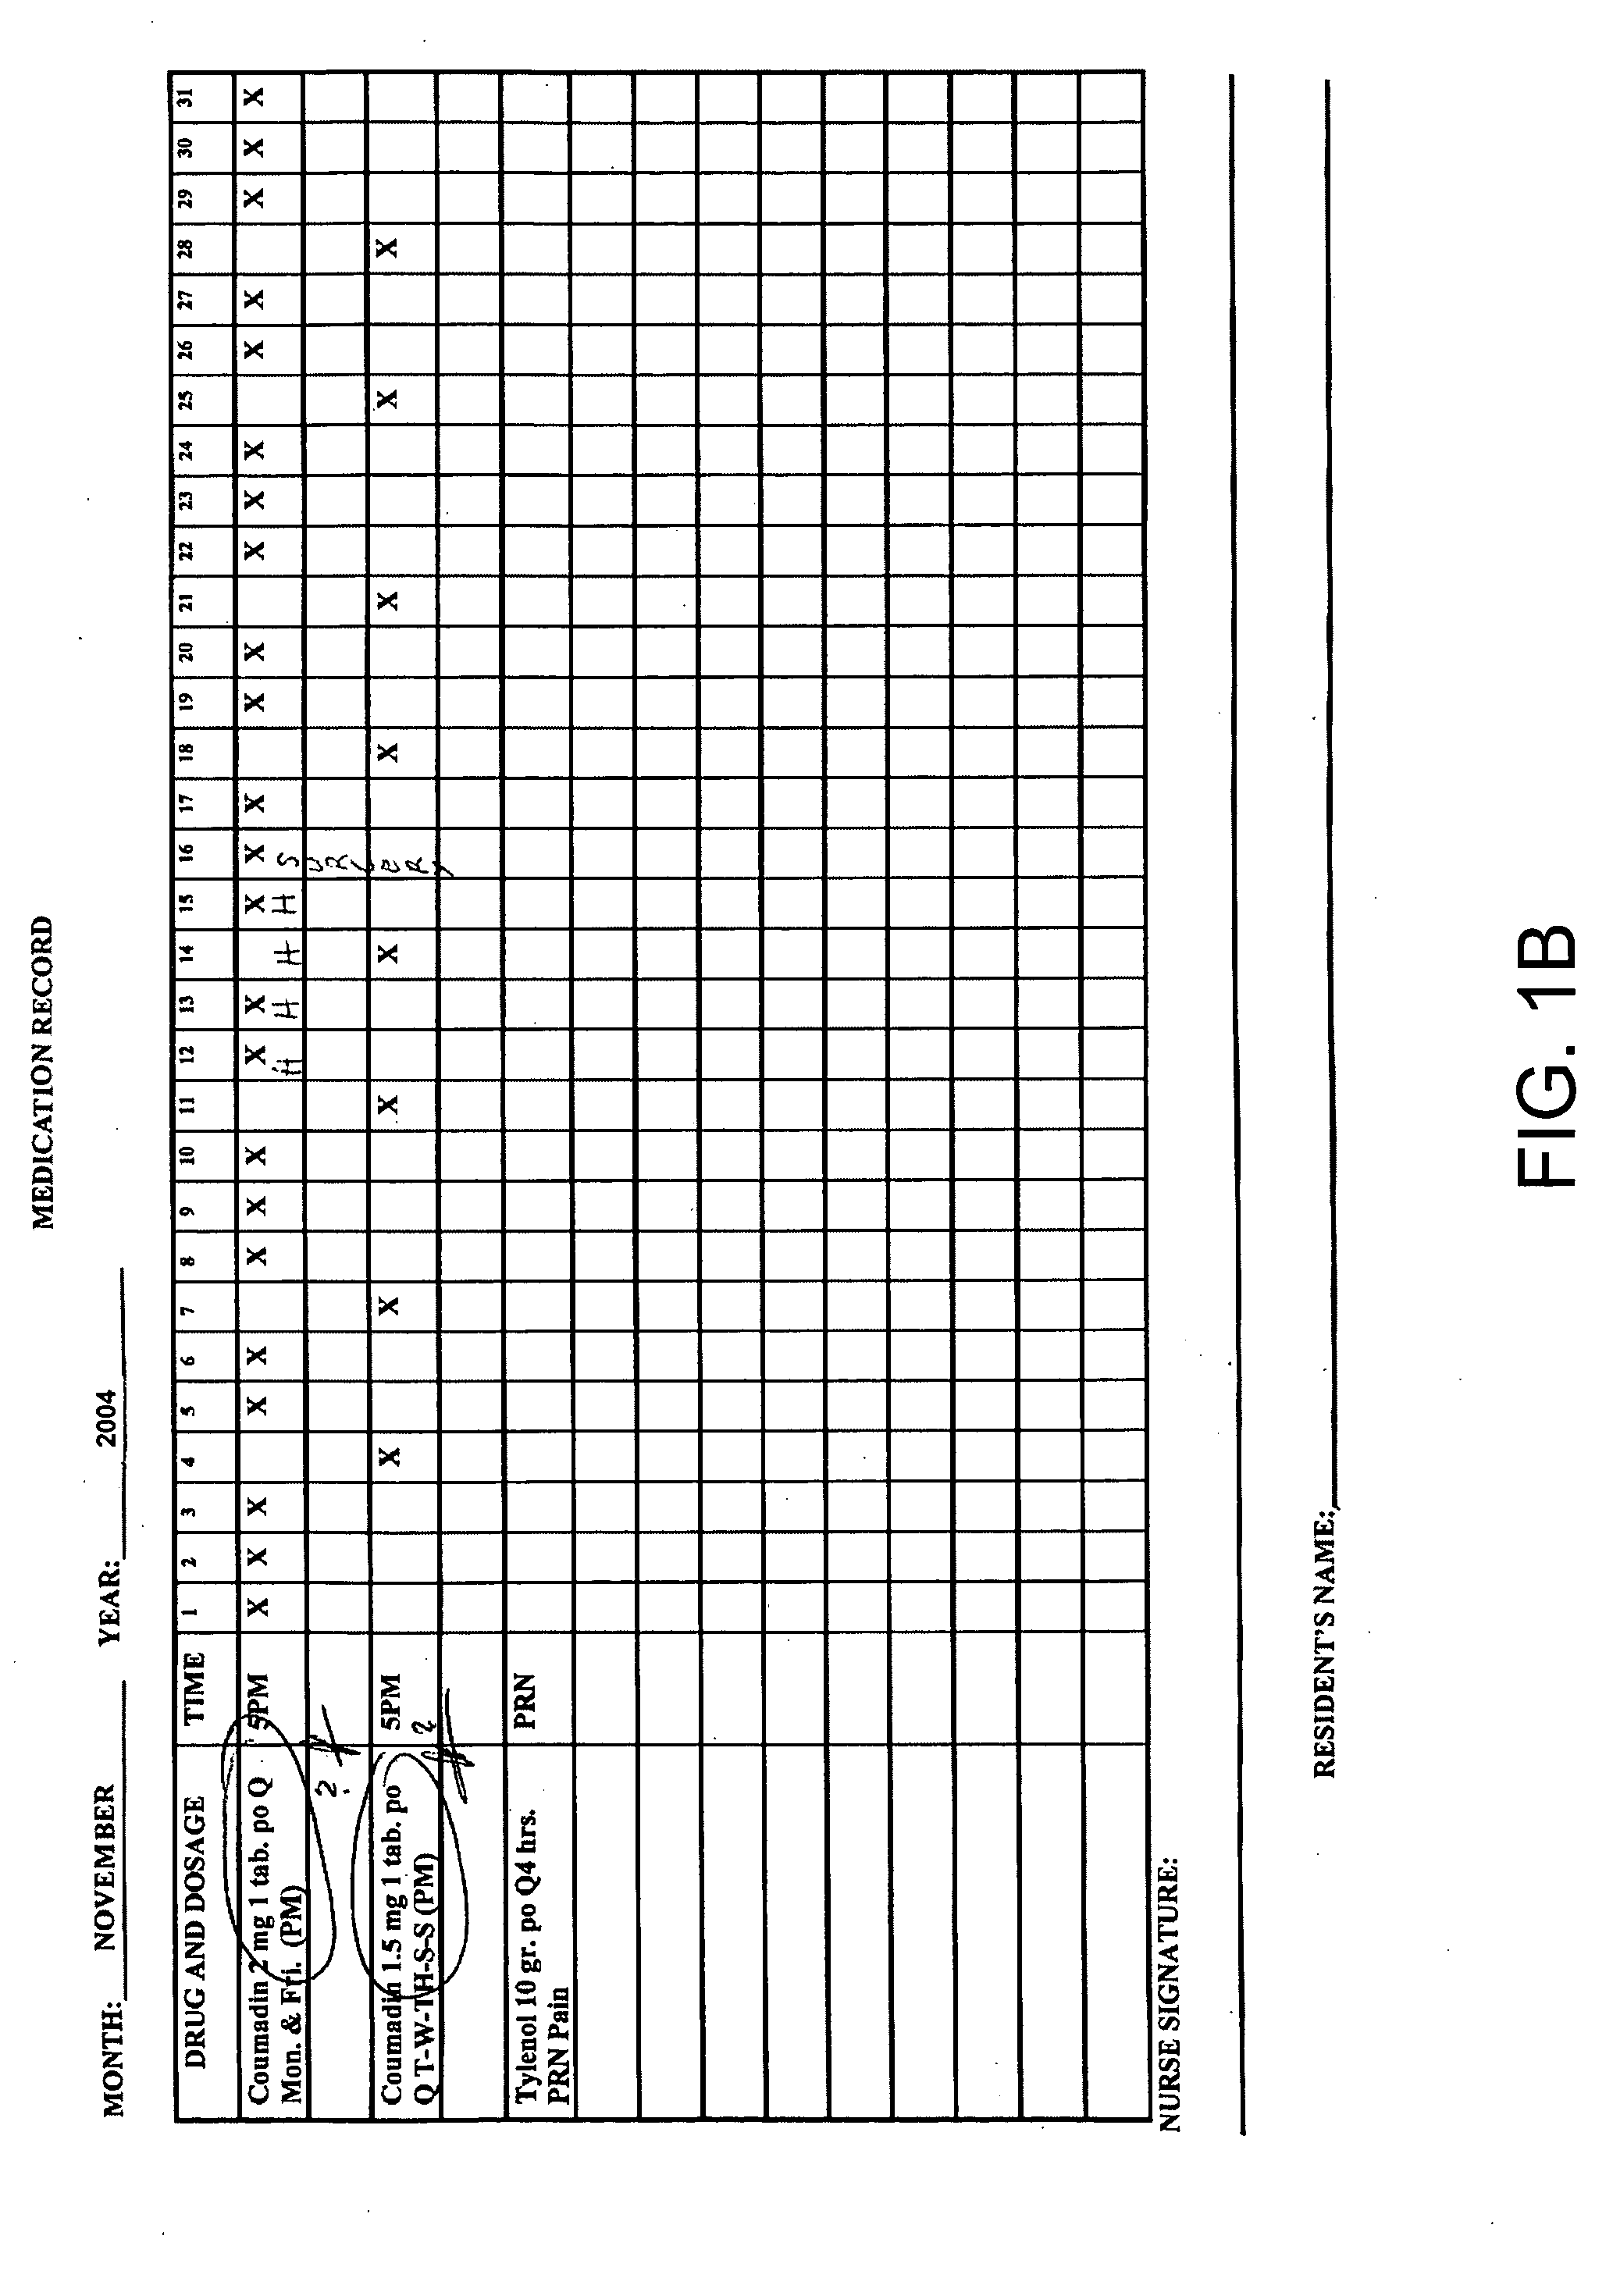 System and method for scheduling pharmaceutical prescriptions